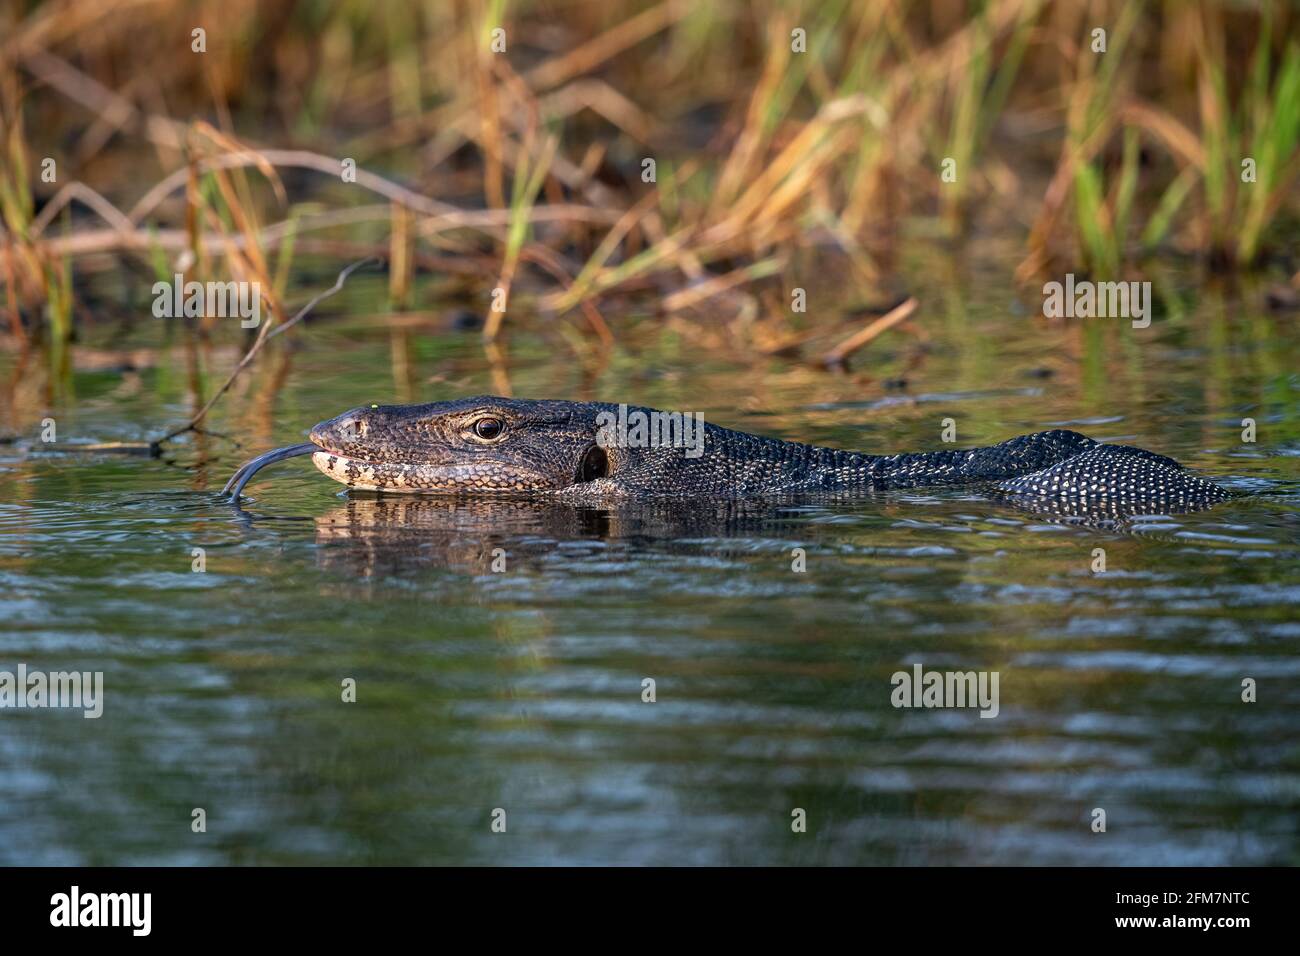 The Asian water monitor (Varanus salvator), also called common water monitor, is a large varanid lizard native to South and Southeast Asia. Stock Photo